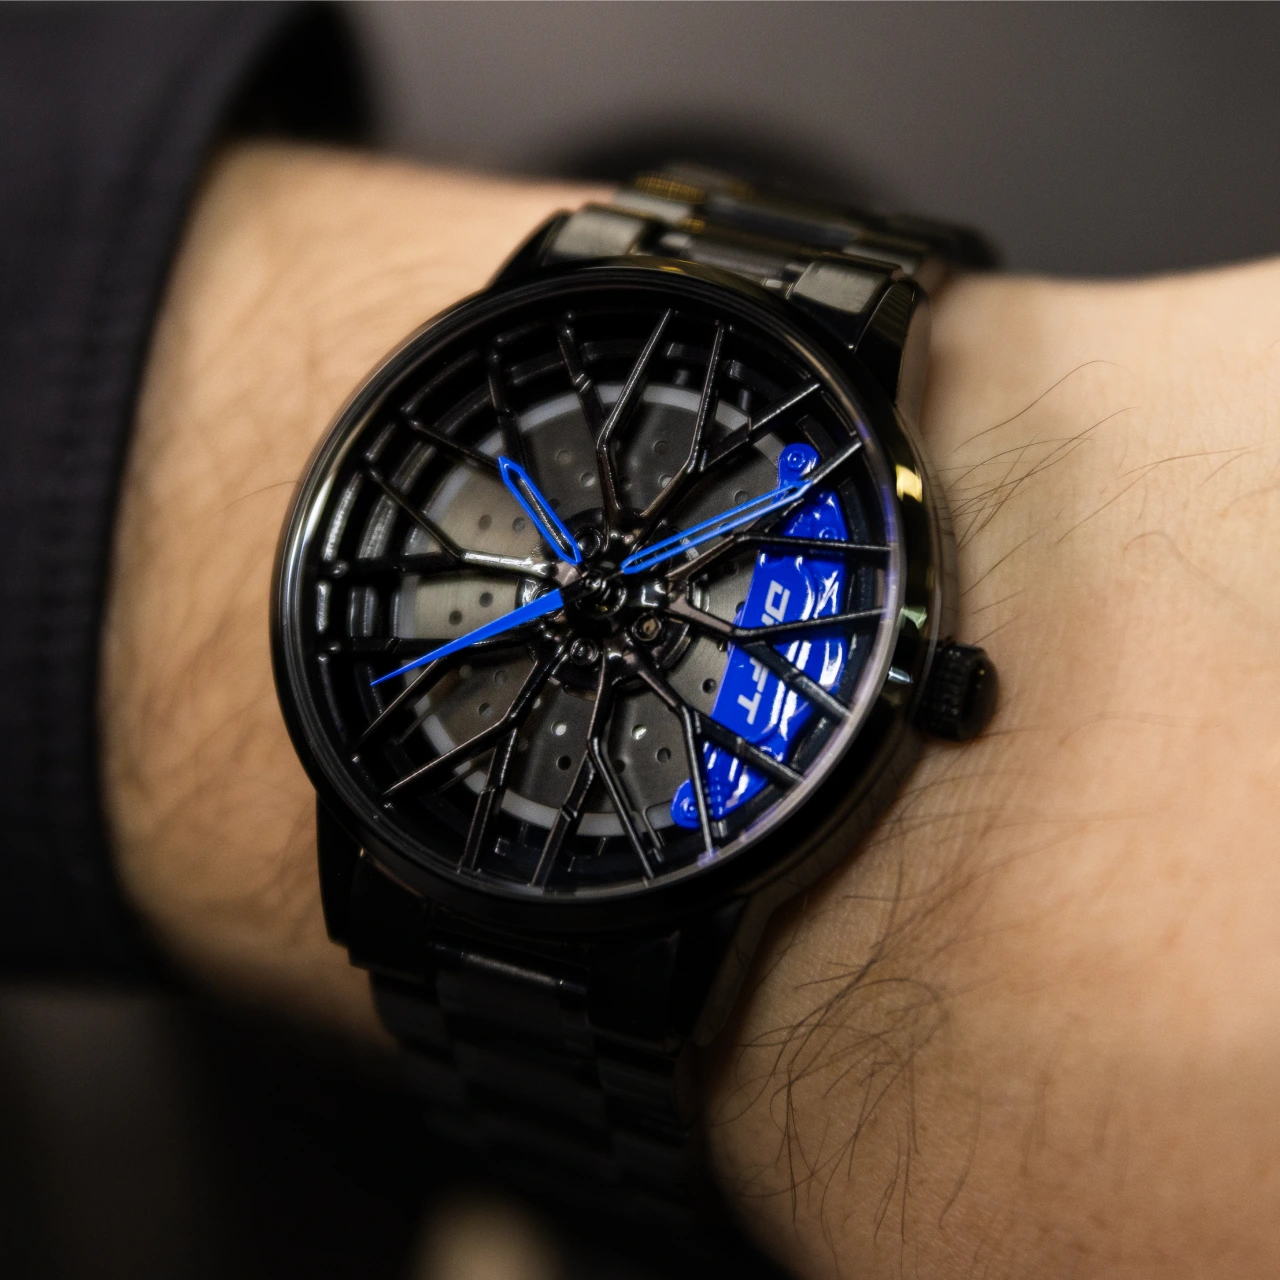  Rev up your style with our blue Motorsport Rim Watch! Crafted by a German startup, these precision watches are designed for motorsport, tuning, and auto enthusiasts. Ignite your passion now! #id_46744363008330